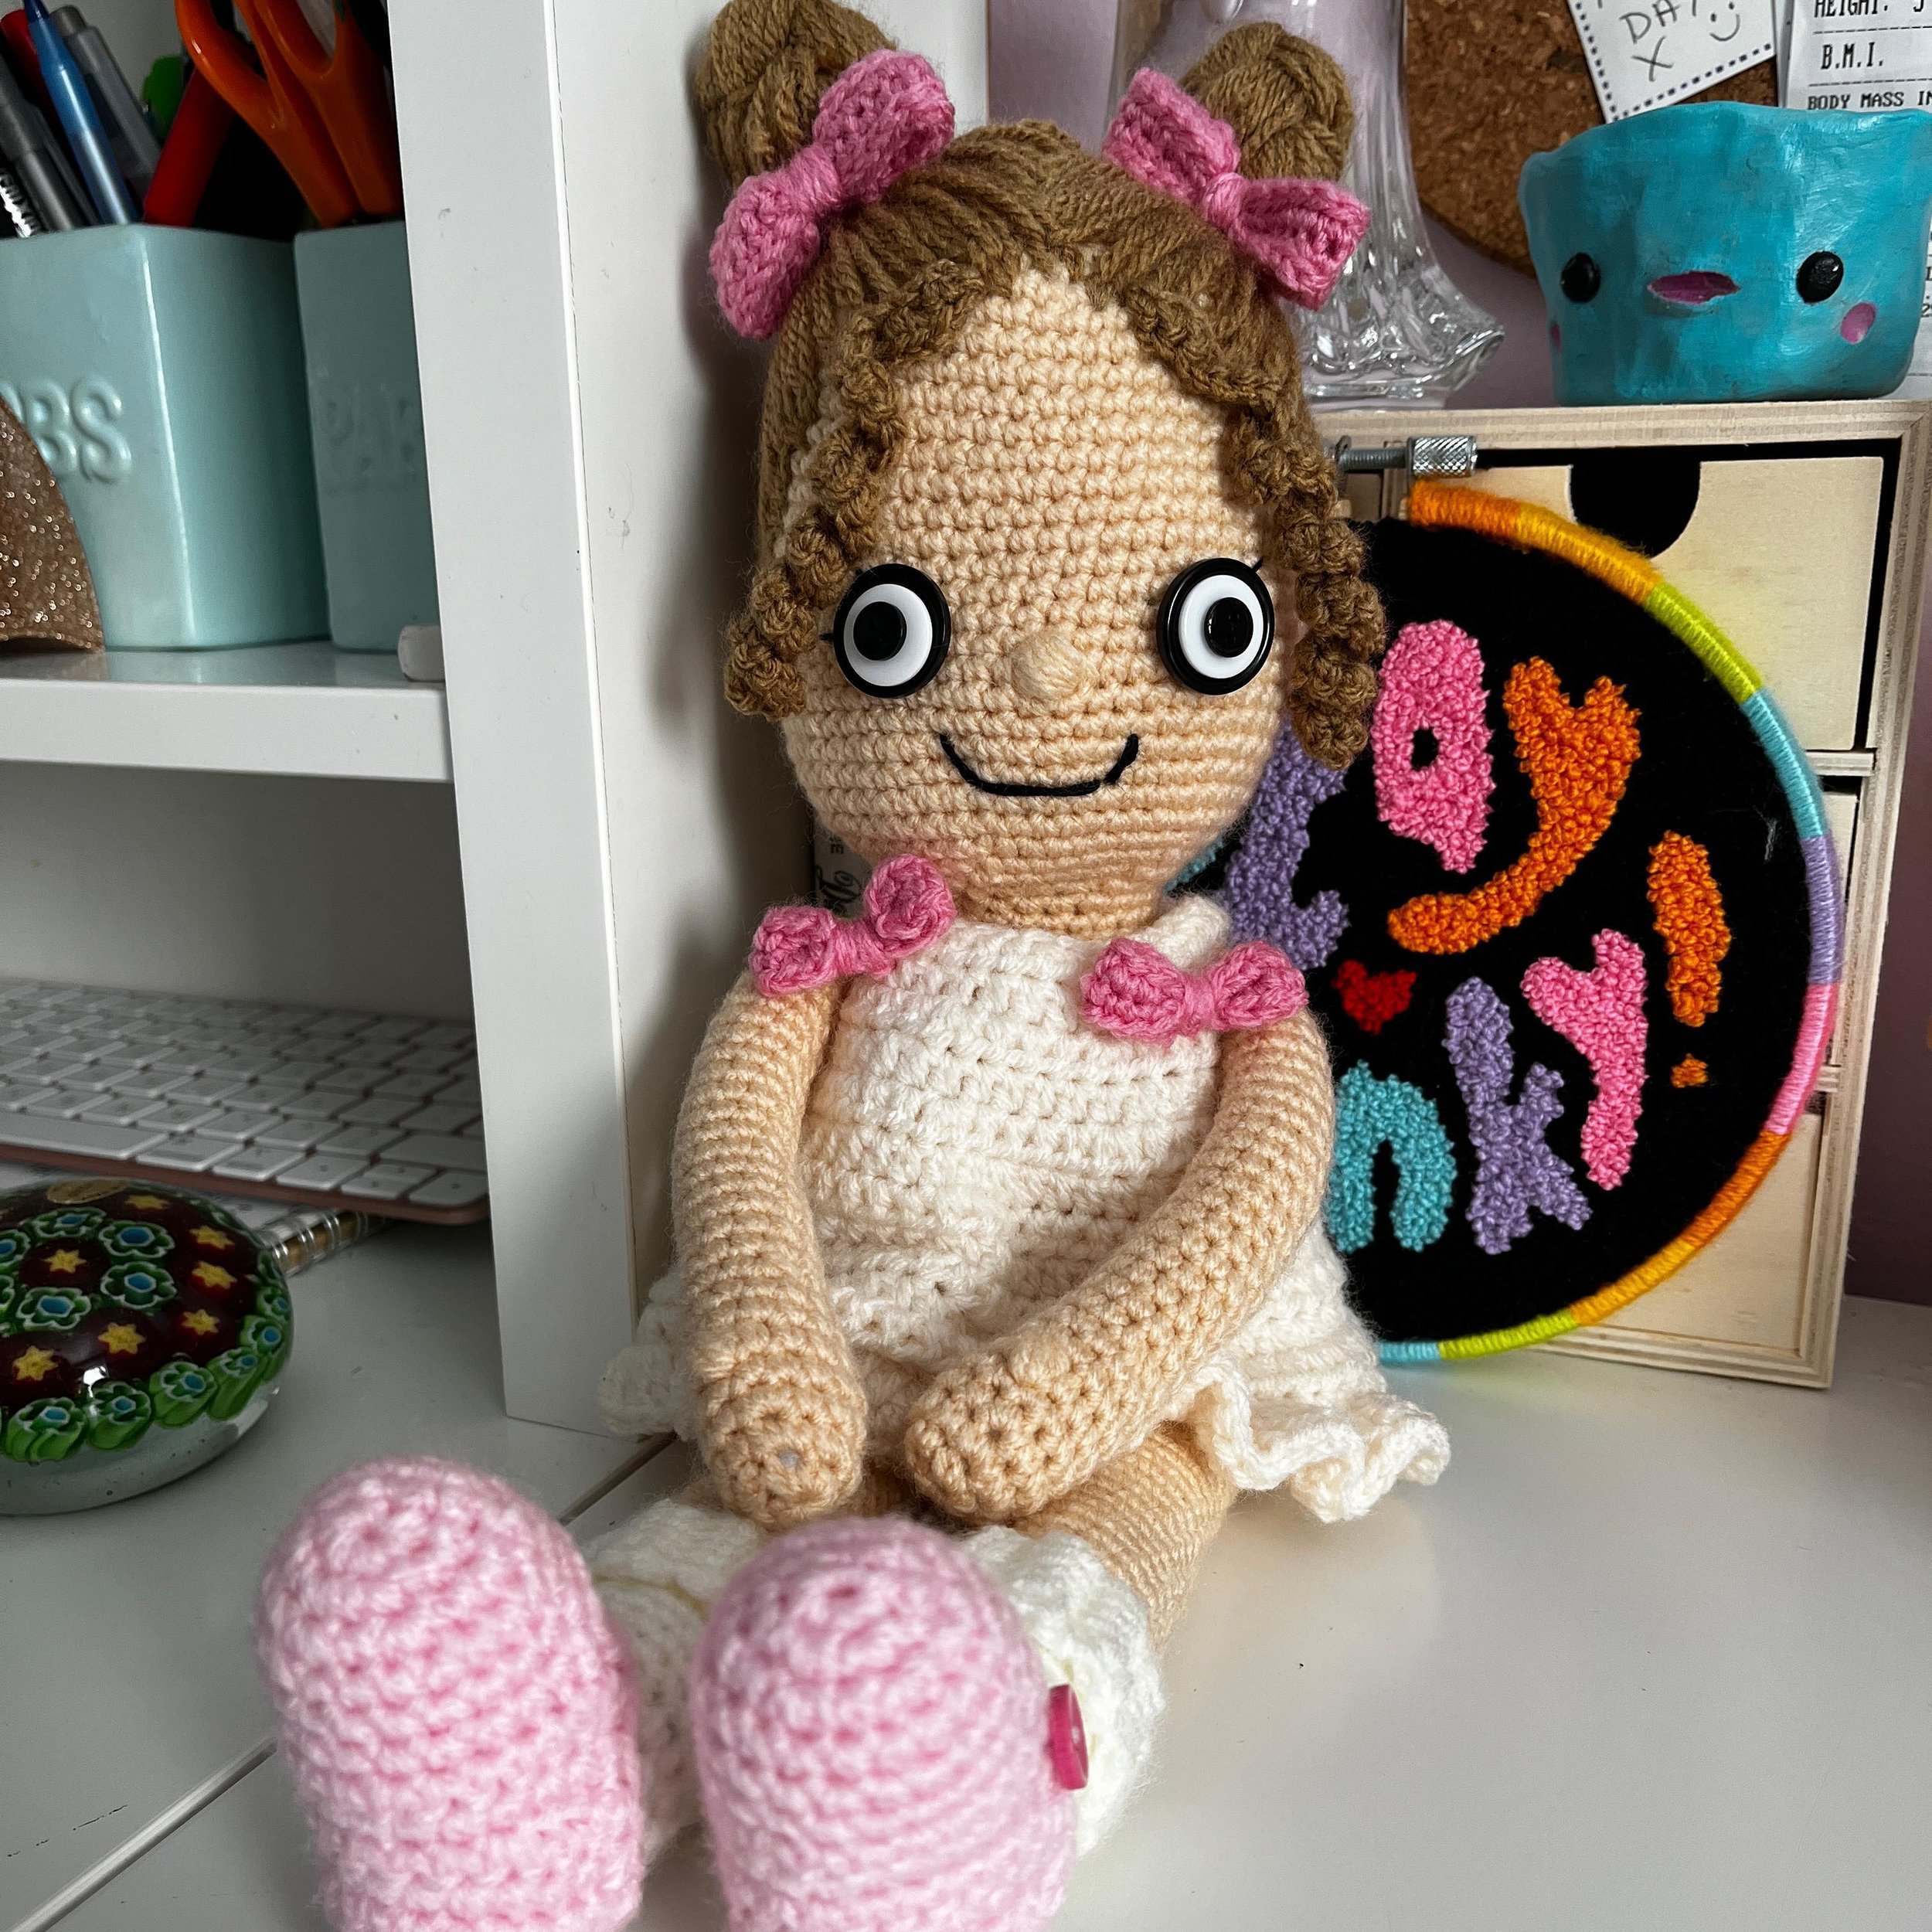 Now she&rsquo;s arrived at her forever home, I can share! ❤️ I don&rsquo;t make a lot of dolls, but I really enjoyed this special commission for @jjmartines94 🥰 Was a pleasure working with you, Jared! ❤️ 
.
#crochet #amigurumi #doll #crochetdoll #gi